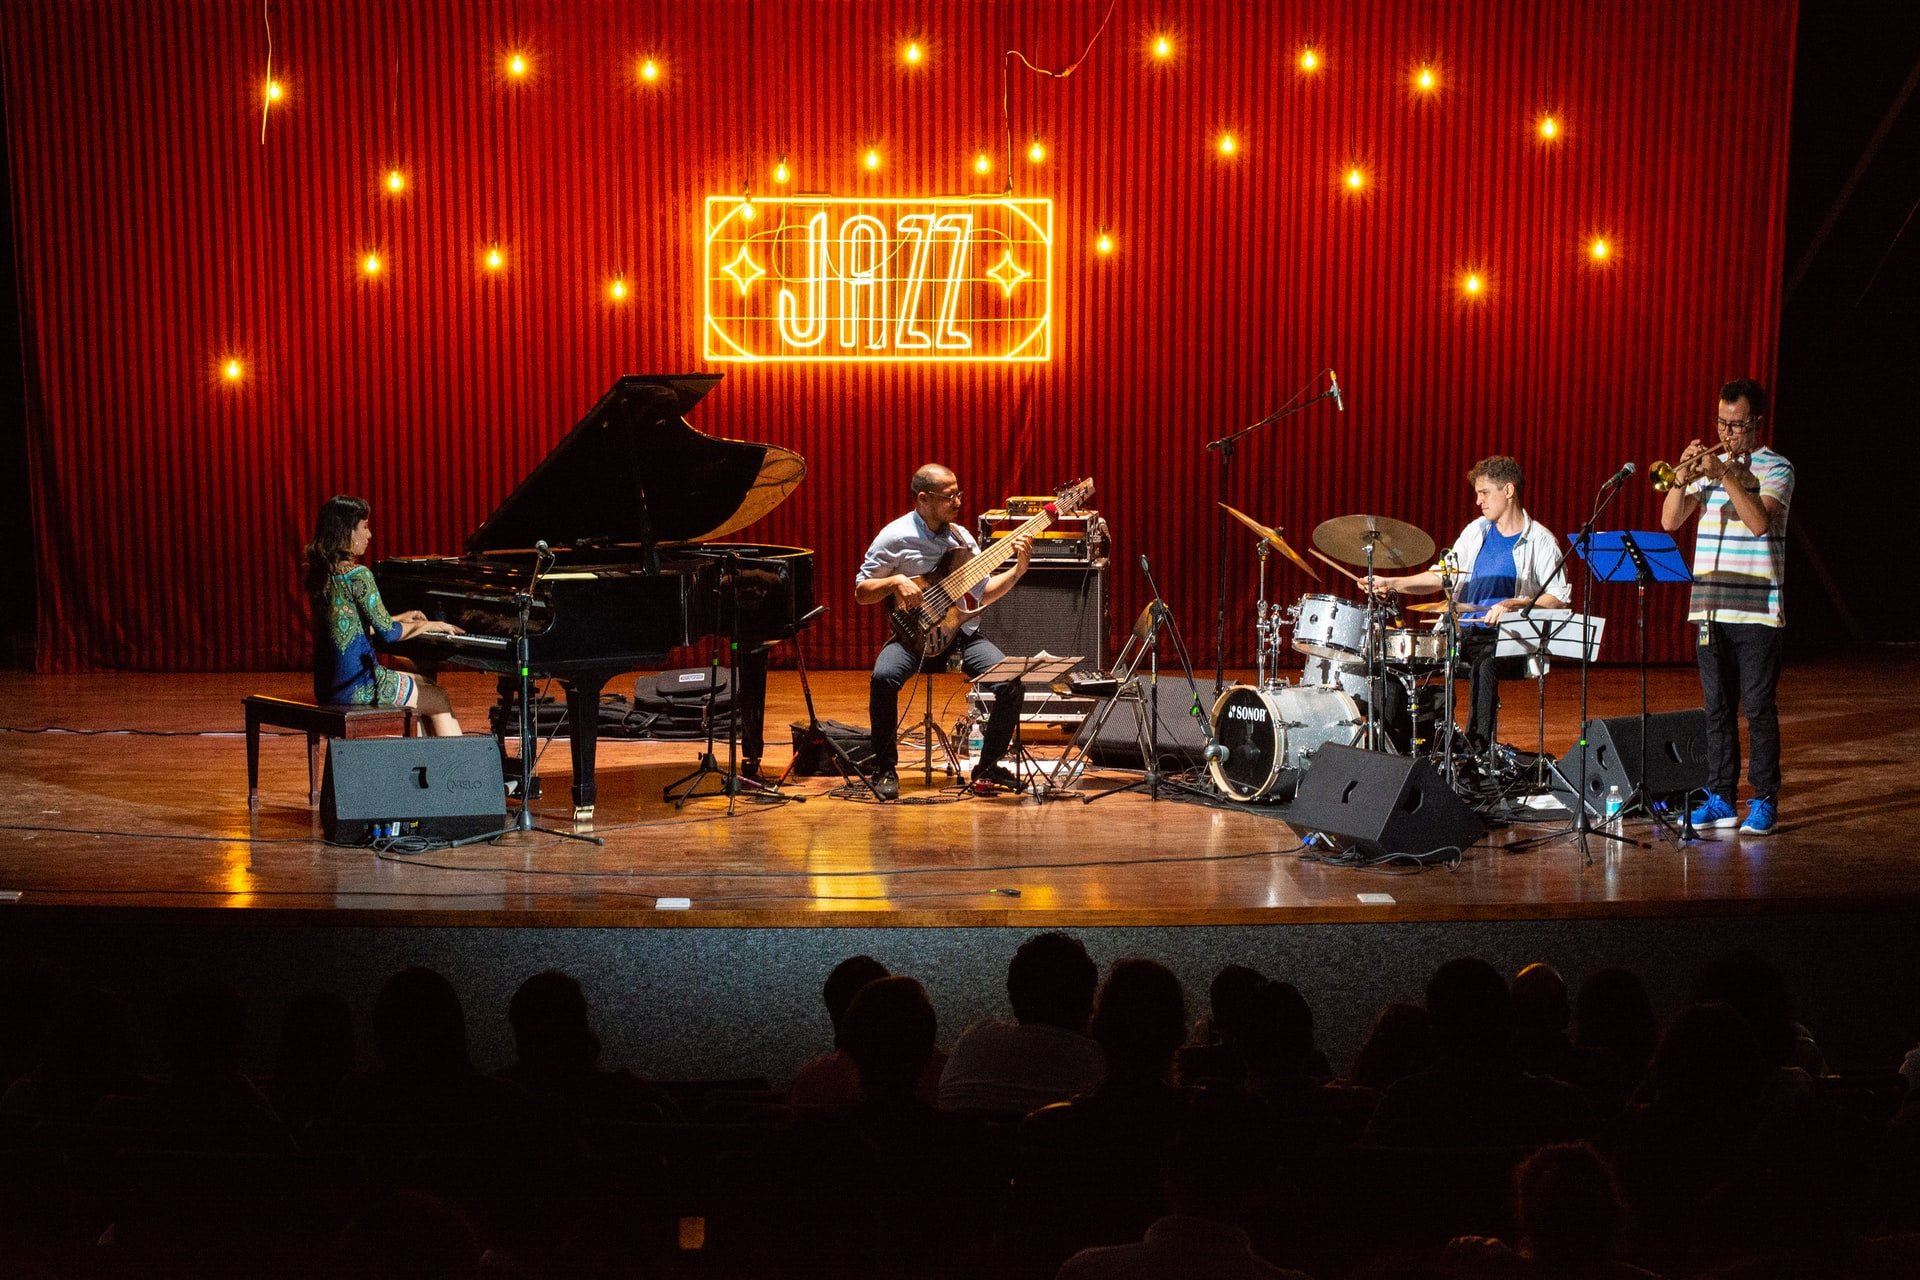 Jazz band playing on stage with red light sign "JAZZ" behind them. Left to right: woman playing grand piano, man playing bass, man playing drums, man playing trumpet.